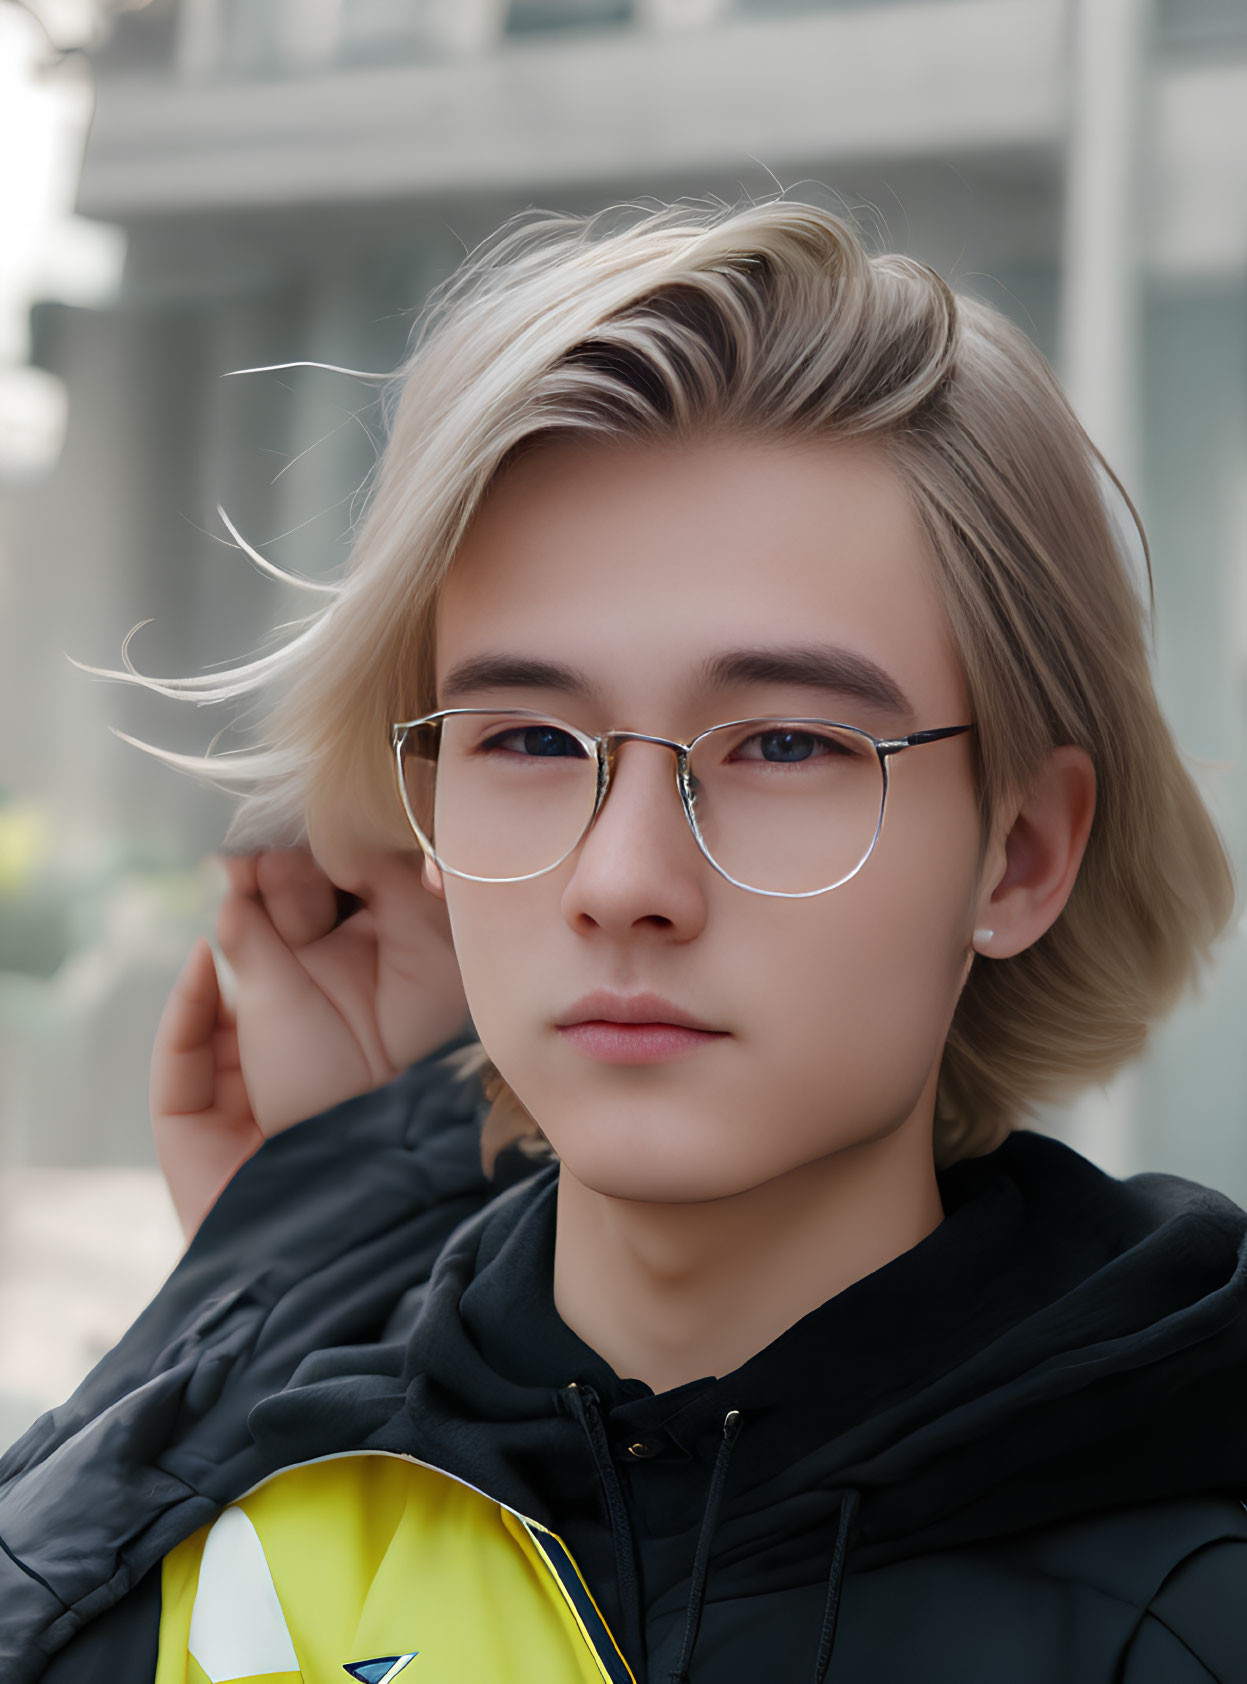 Blond-Haired Person in Black Jacket and Glasses Portrait